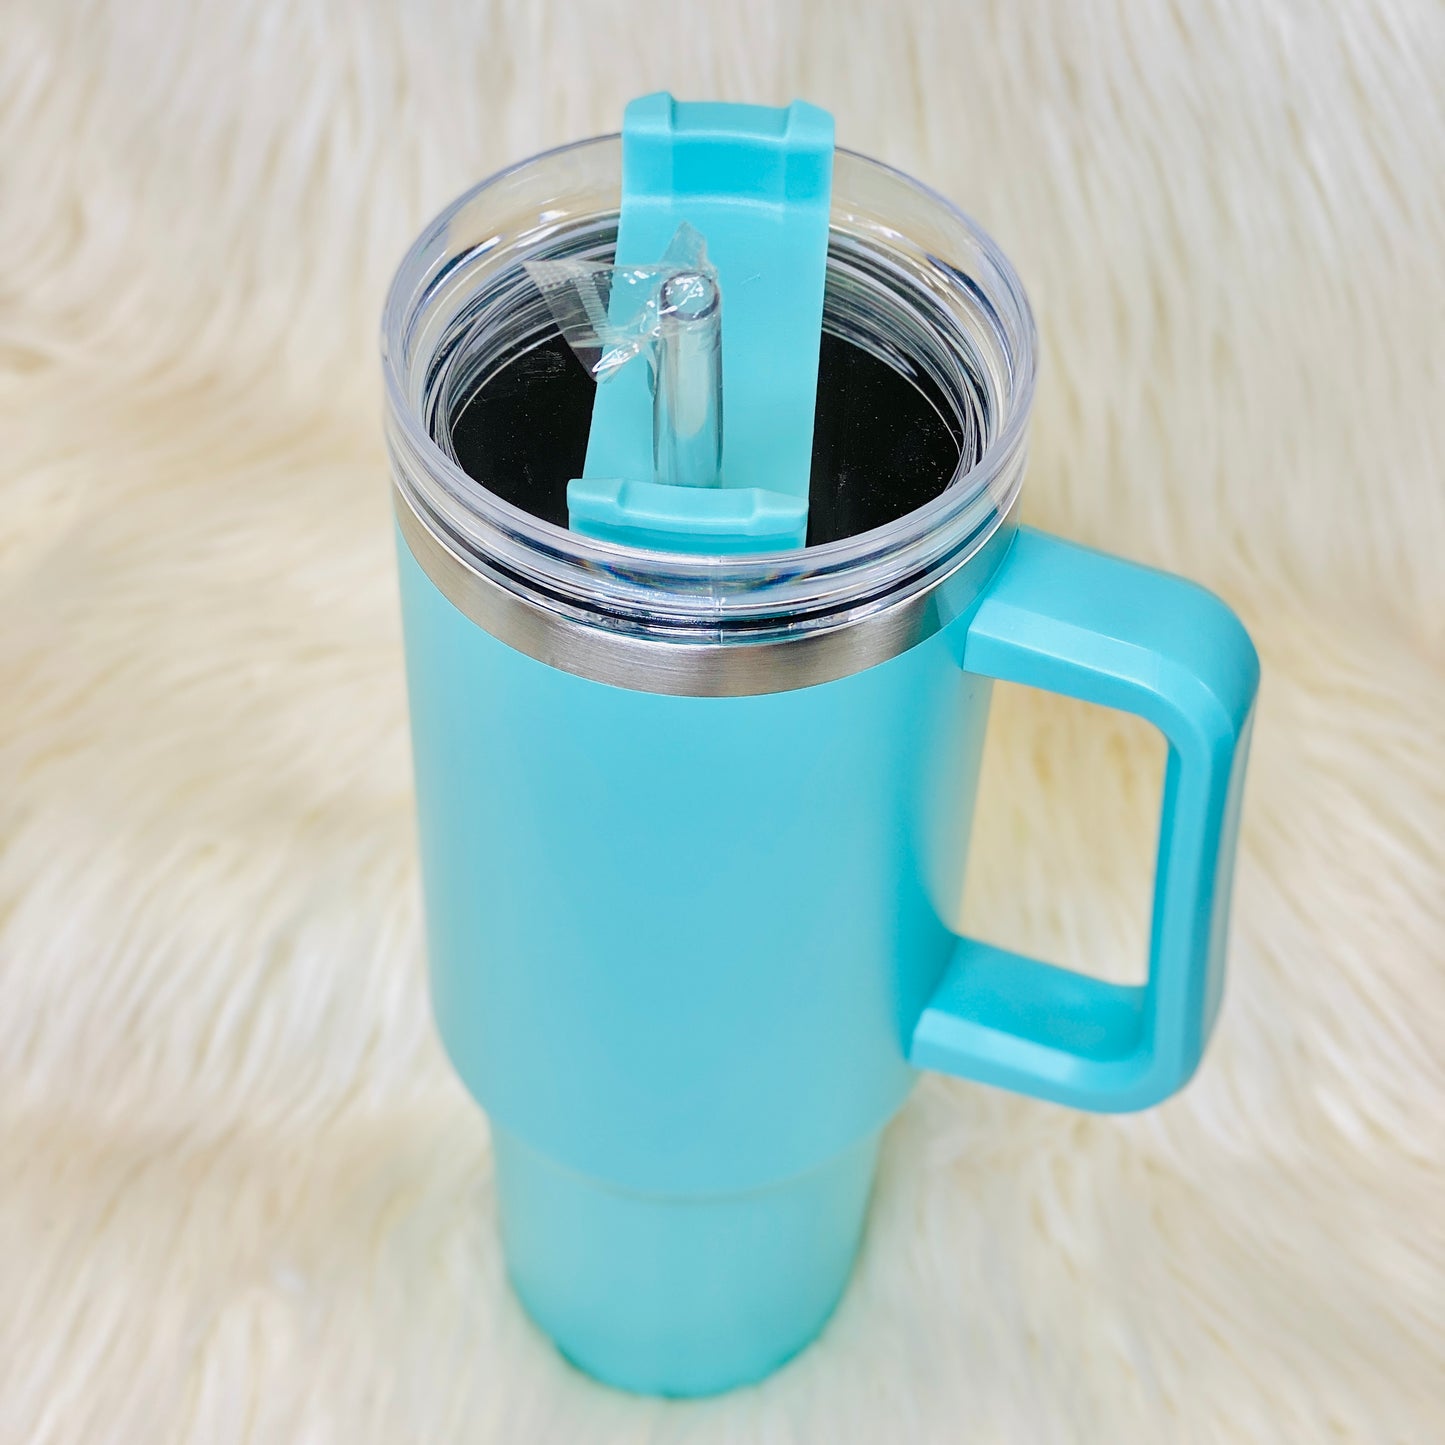 With its vibrant colors and large size, it’s both practical and trendy – the perfect combination! Plus, its ergonomic handle will make carrying your beverage of choice easy and comfortable.